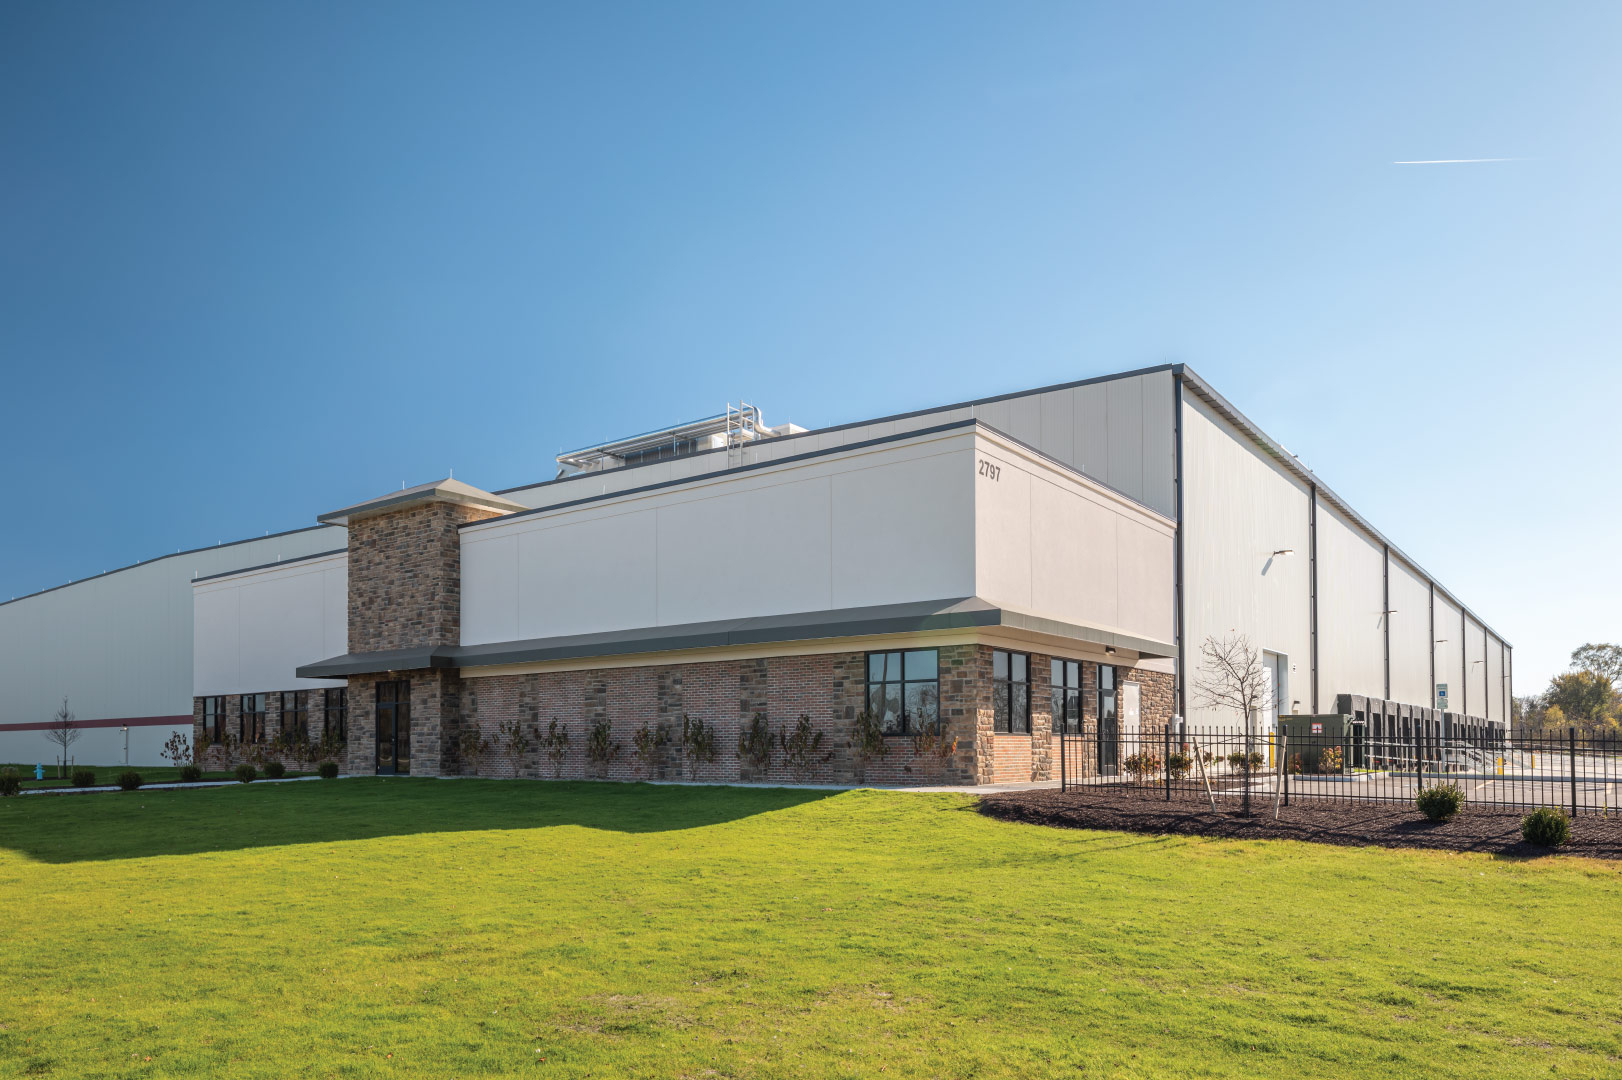 ARCO Brings Cold Storage Solutions to Cleveland with Completion of New Refrigerated Facility